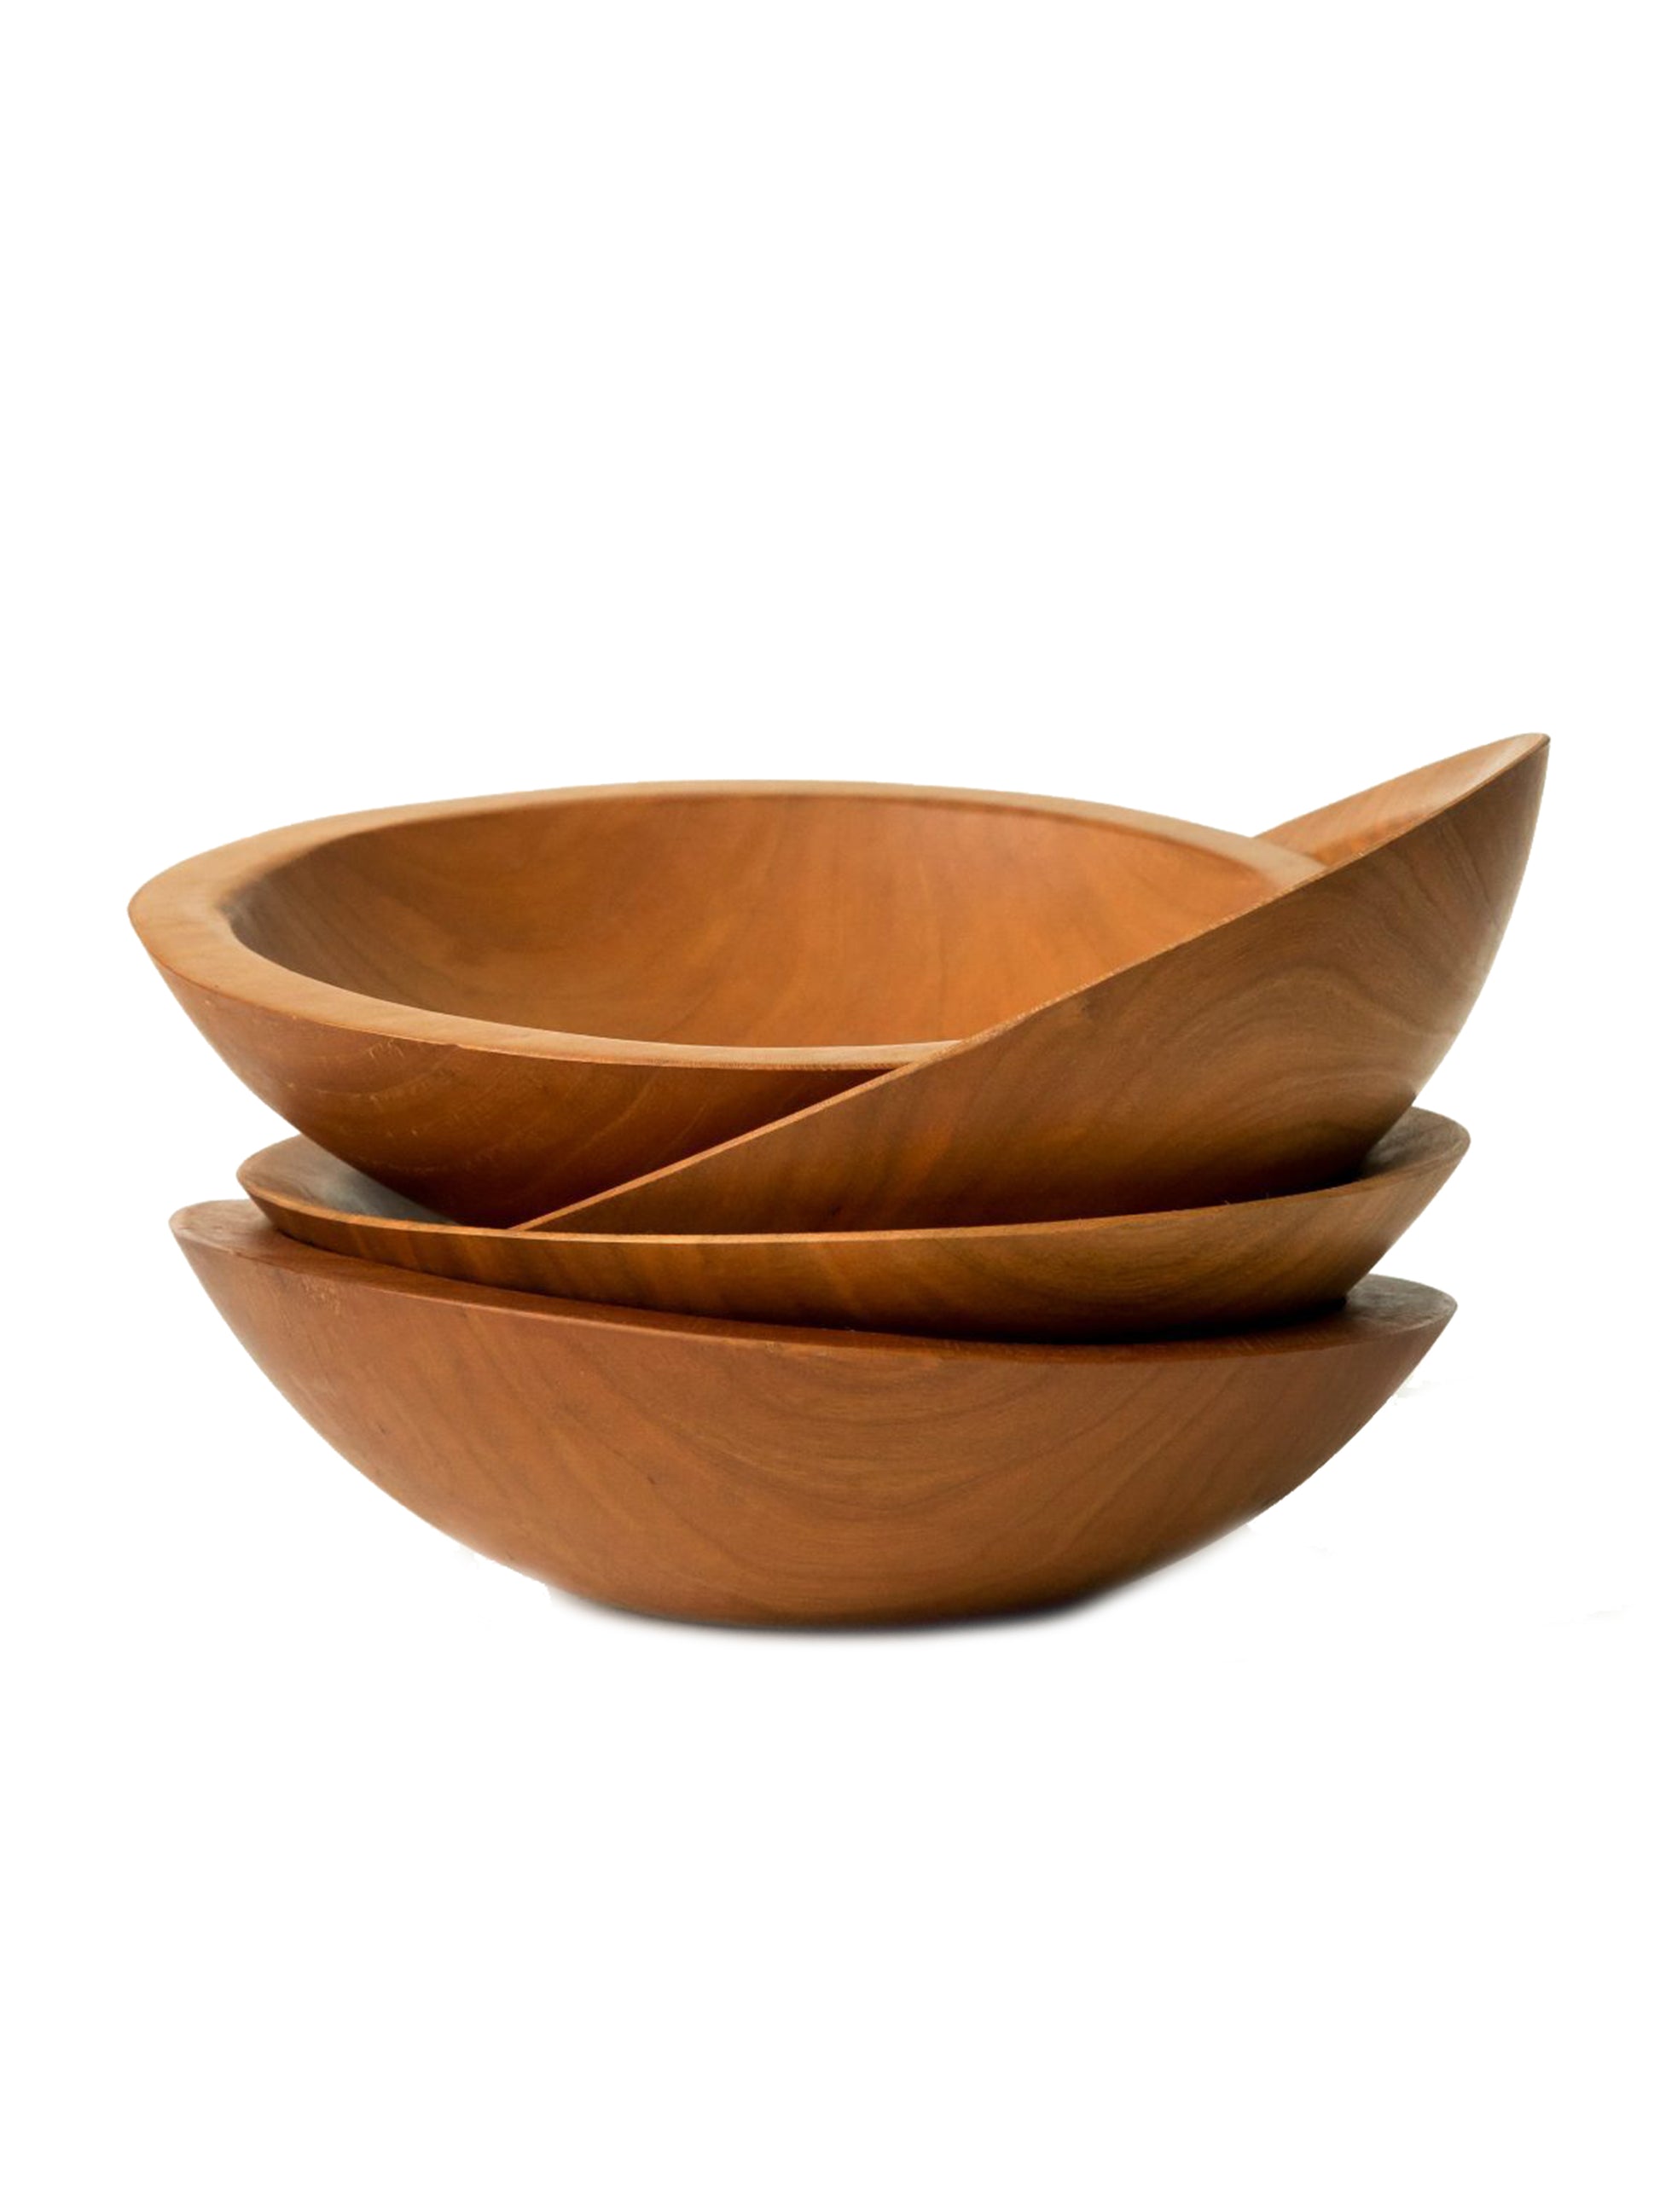 Round Cutting Boards - Peterman's Boards & Bowls